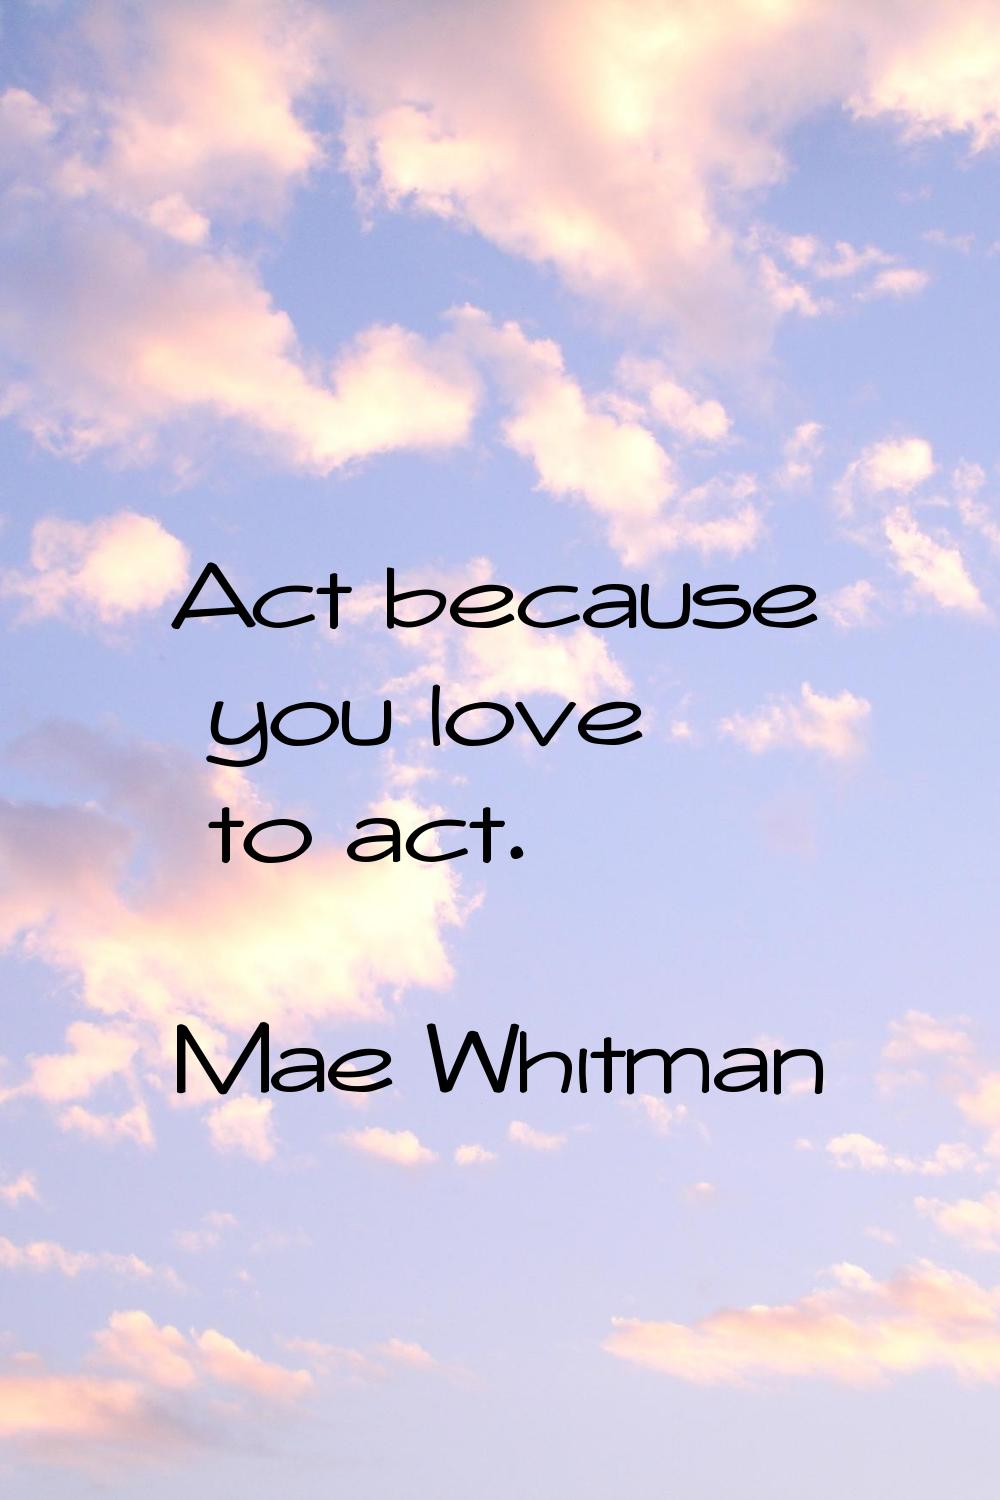 Act because you love to act.